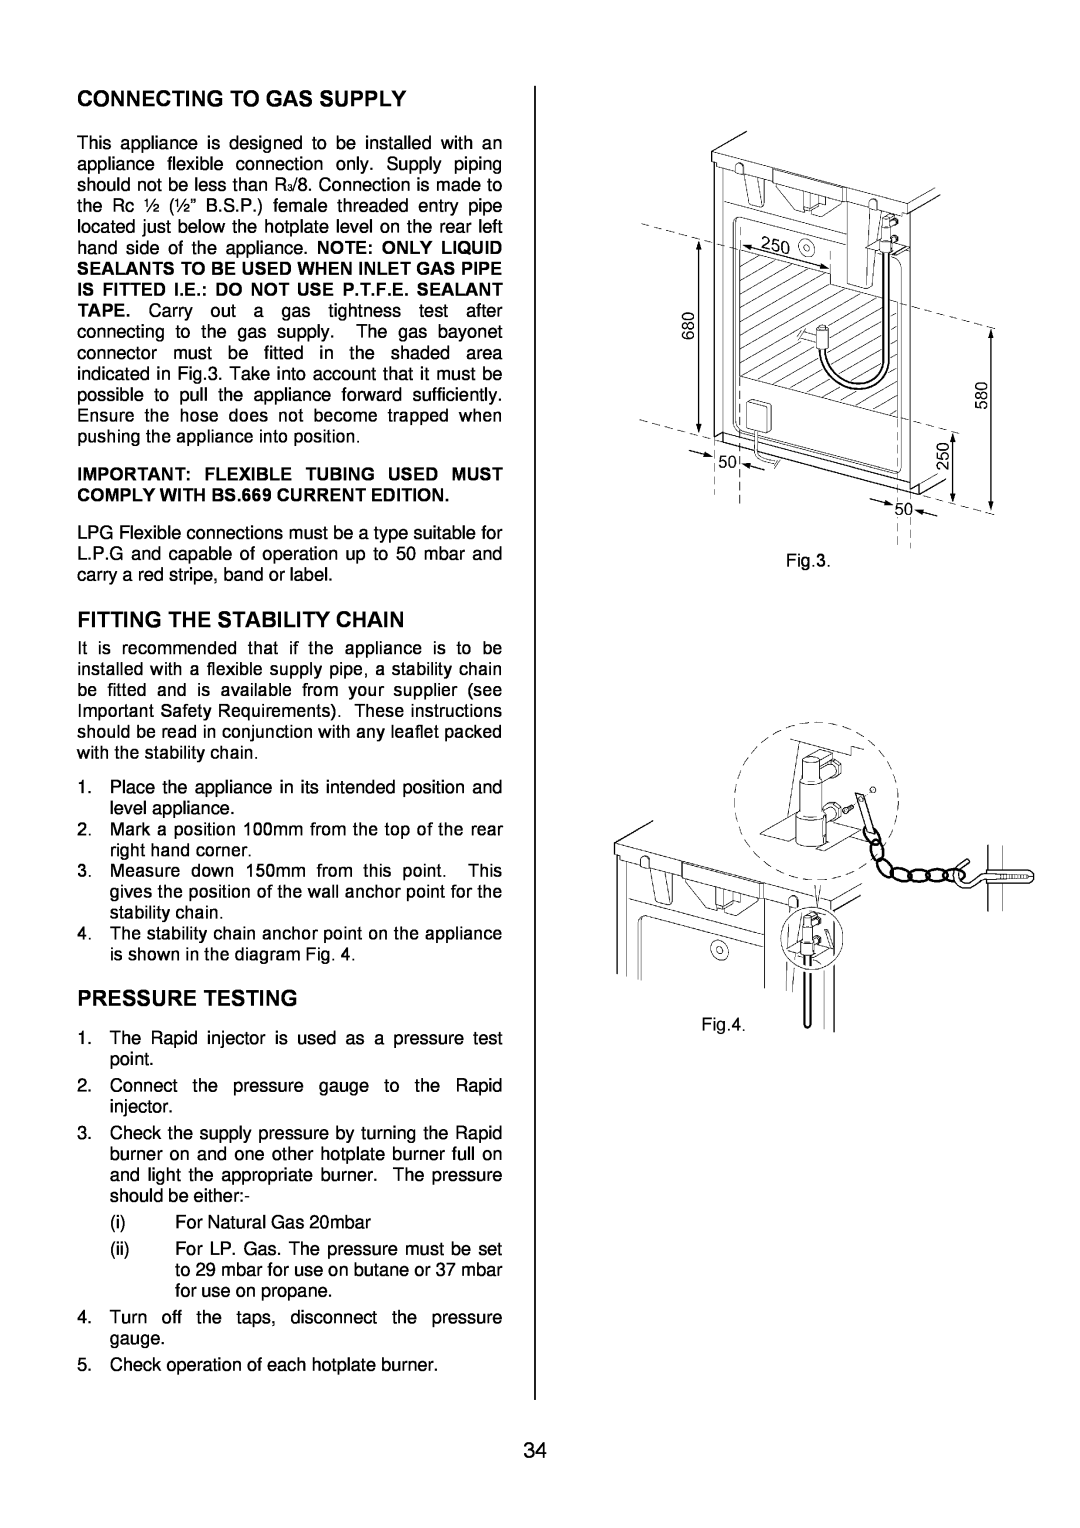 Electrolux EKG6049 user manual Connecting To Gas Supply, Fitting The Stability Chain, Pressure Testing 